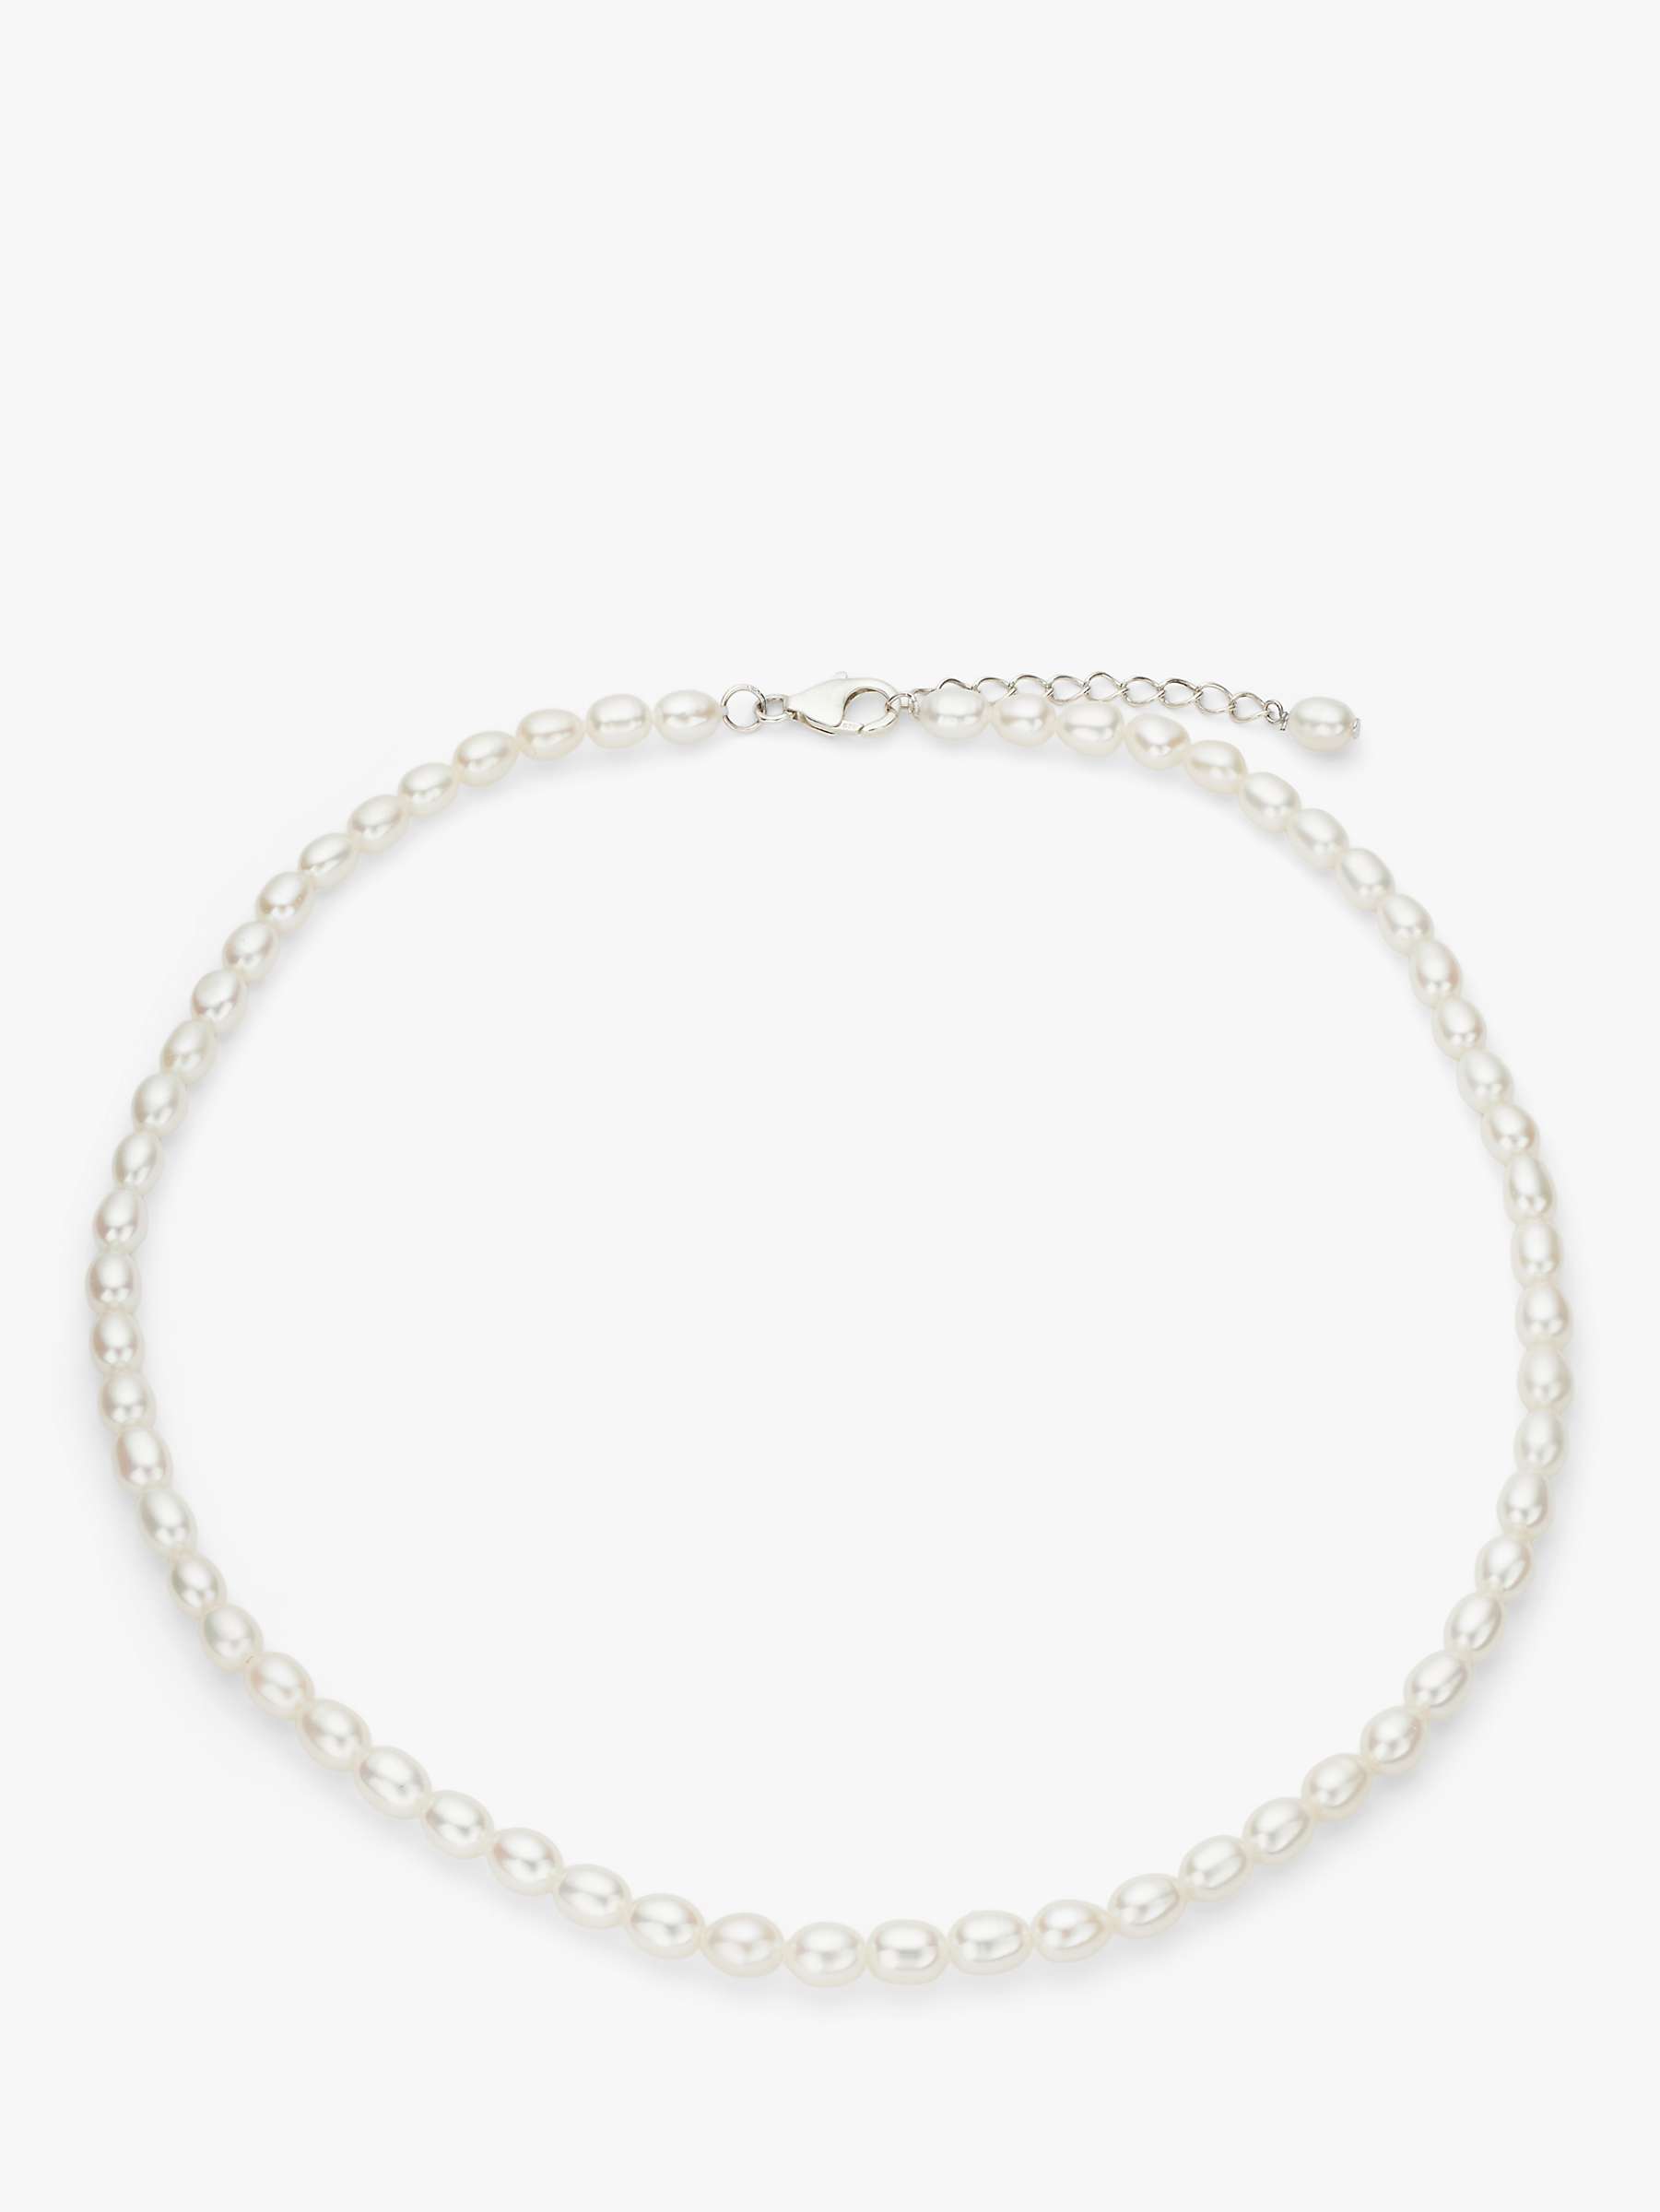 Buy Lido Freshwater Pearl Rice Beaded Necklace, Silver Online at johnlewis.com